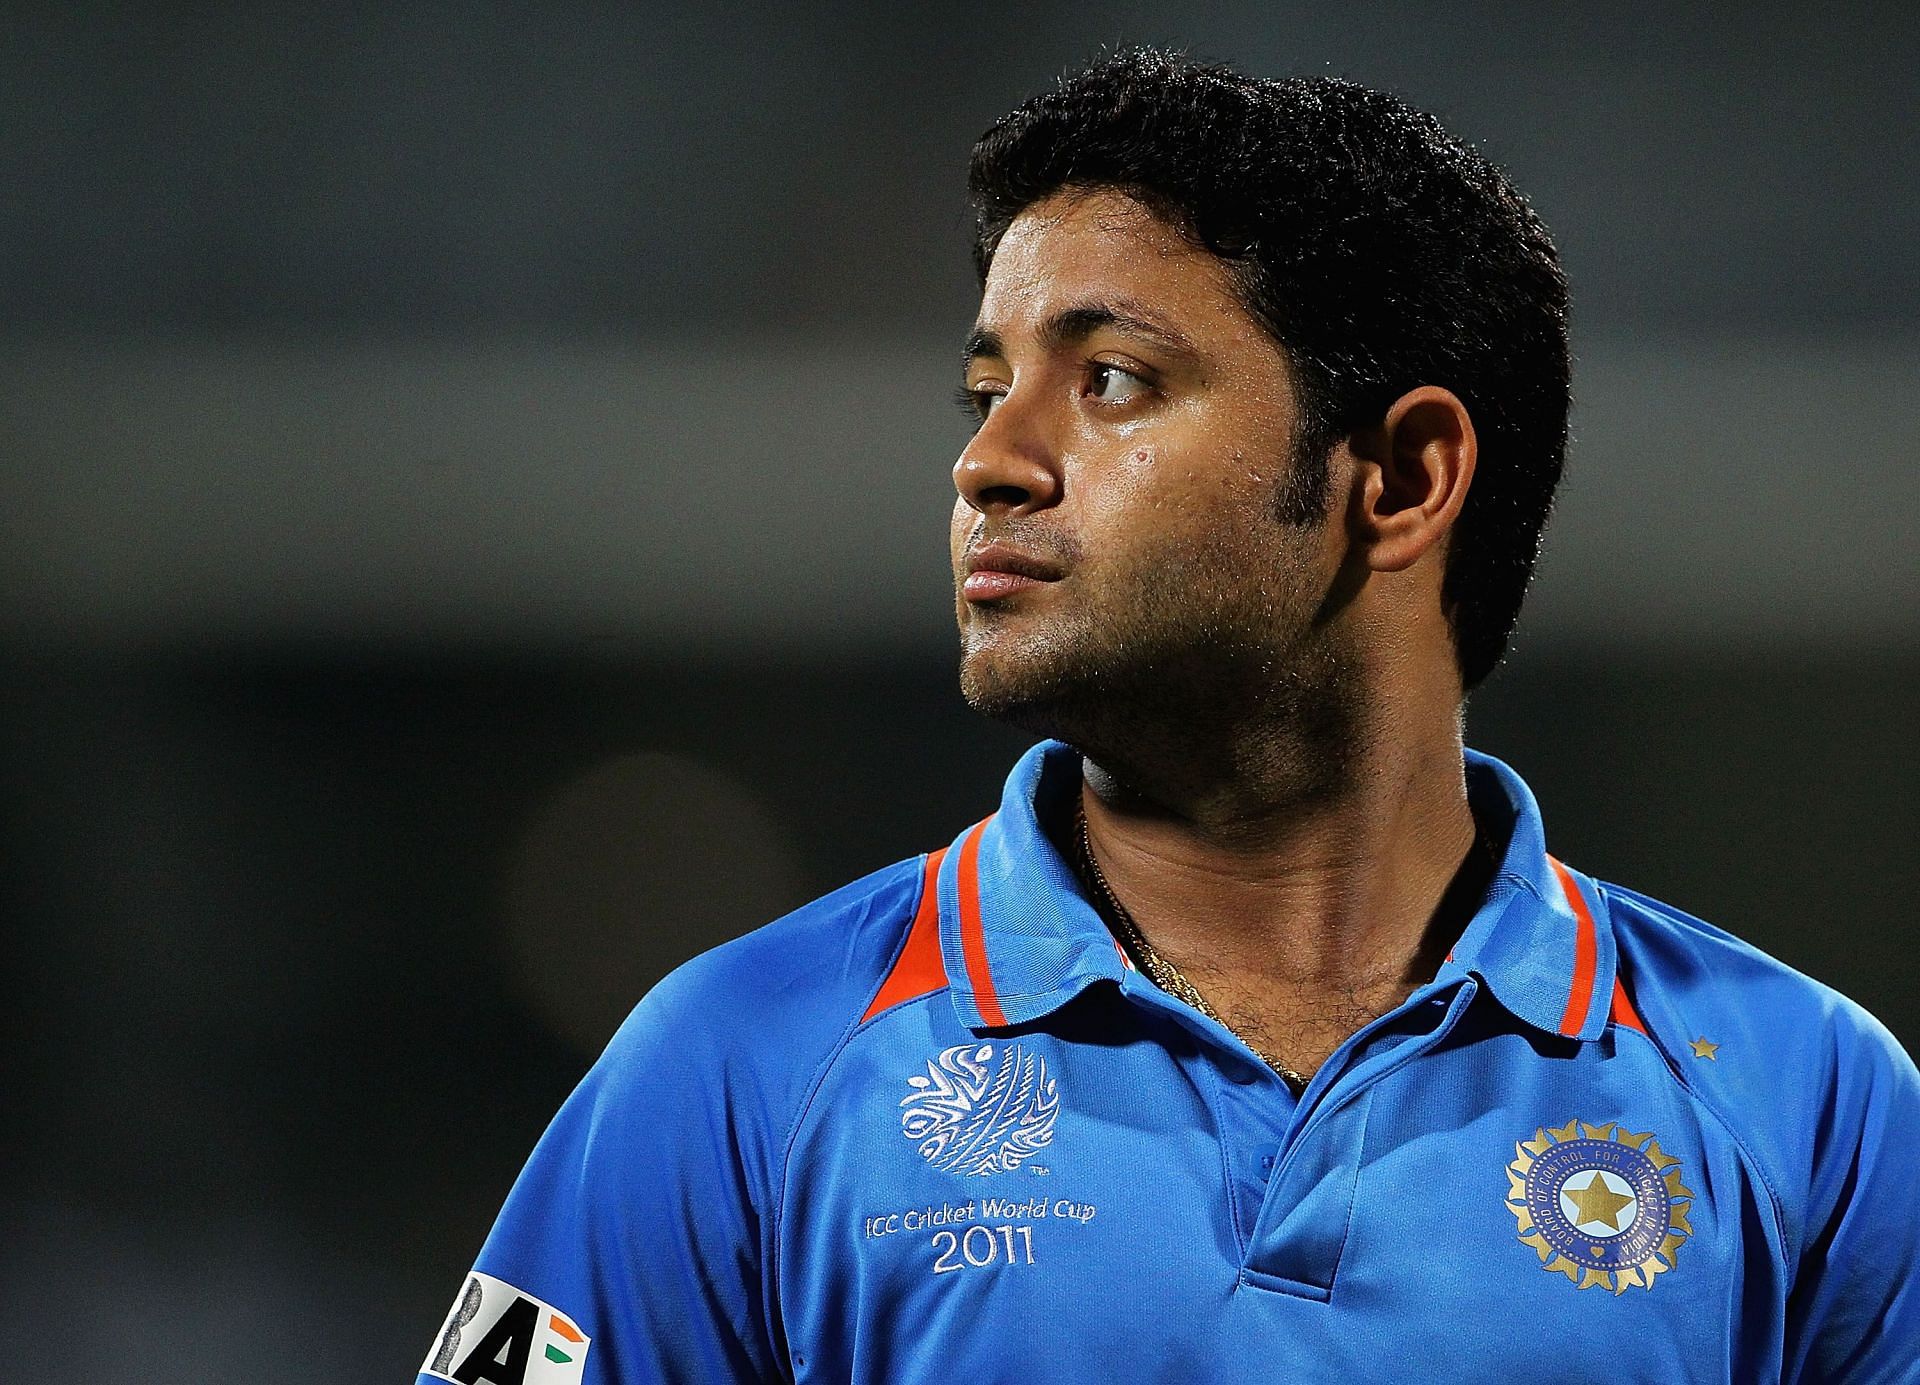 Piyush Chawla will be in action in this Vijay Hazare Trophy game on Saturday.